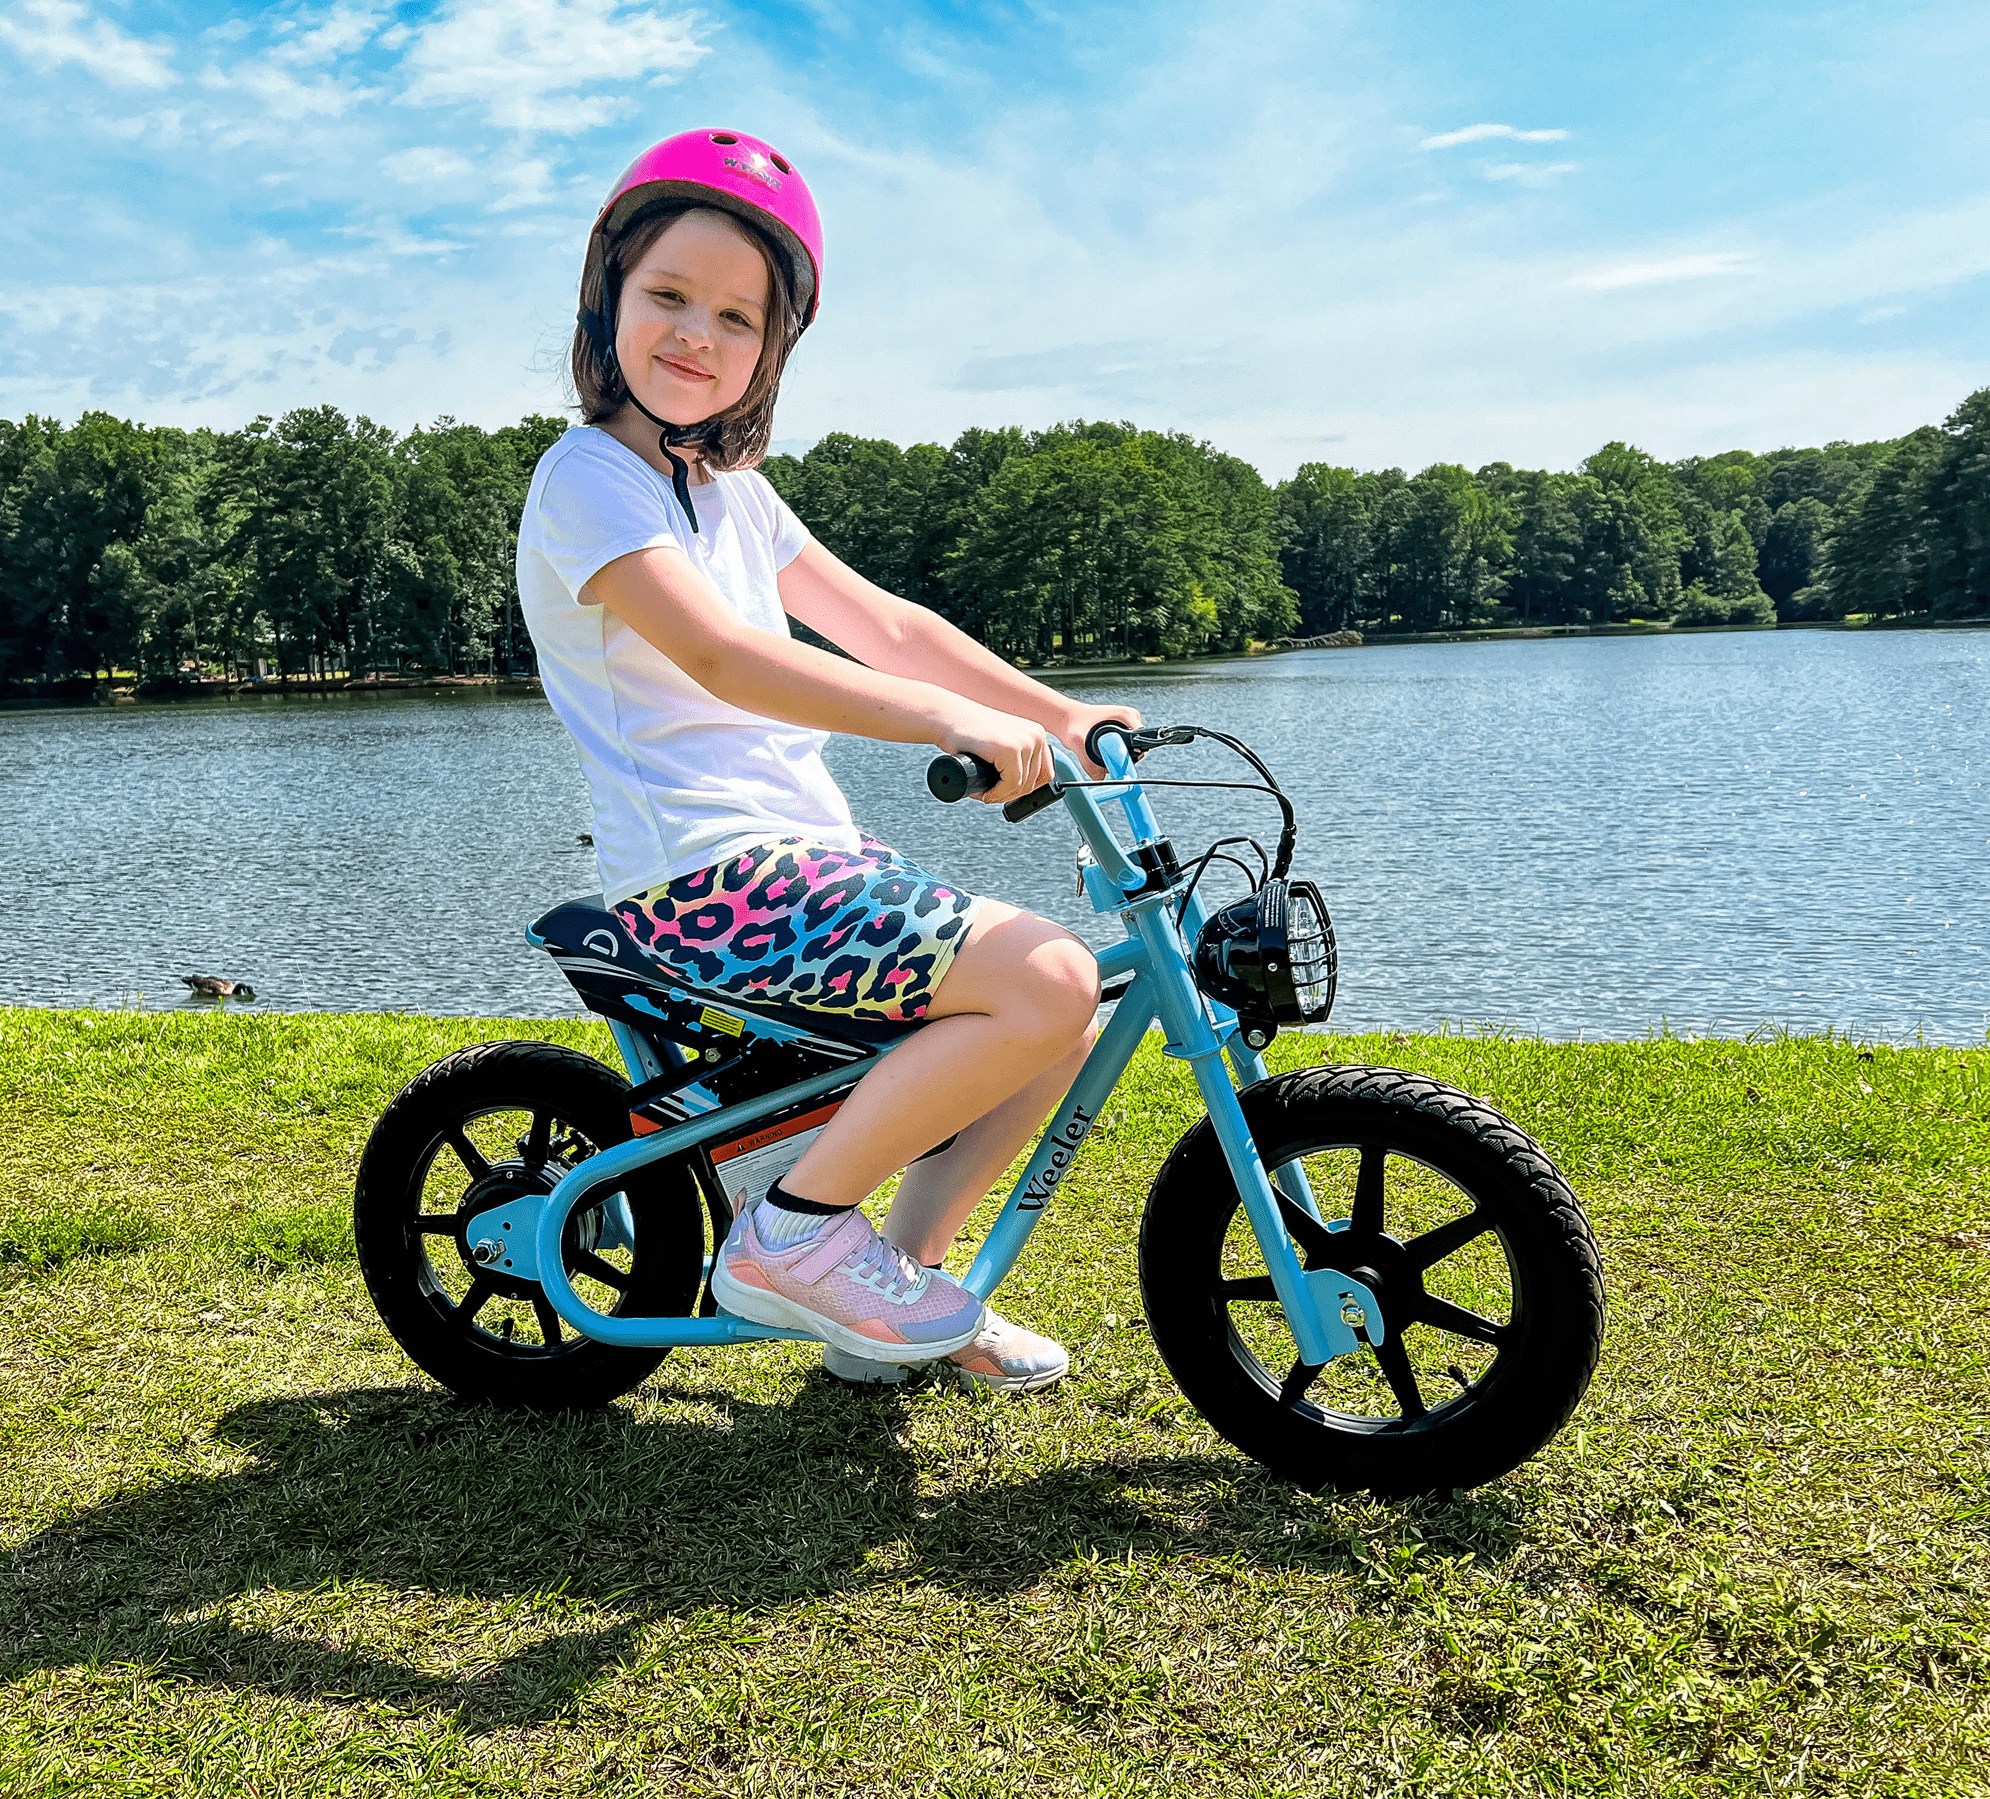 Young_girl_on_Droyd_electric_Weeler_bicycle_in_front_of_lake_98755858-4128-4ef4-89d1-d1e90d6486e4